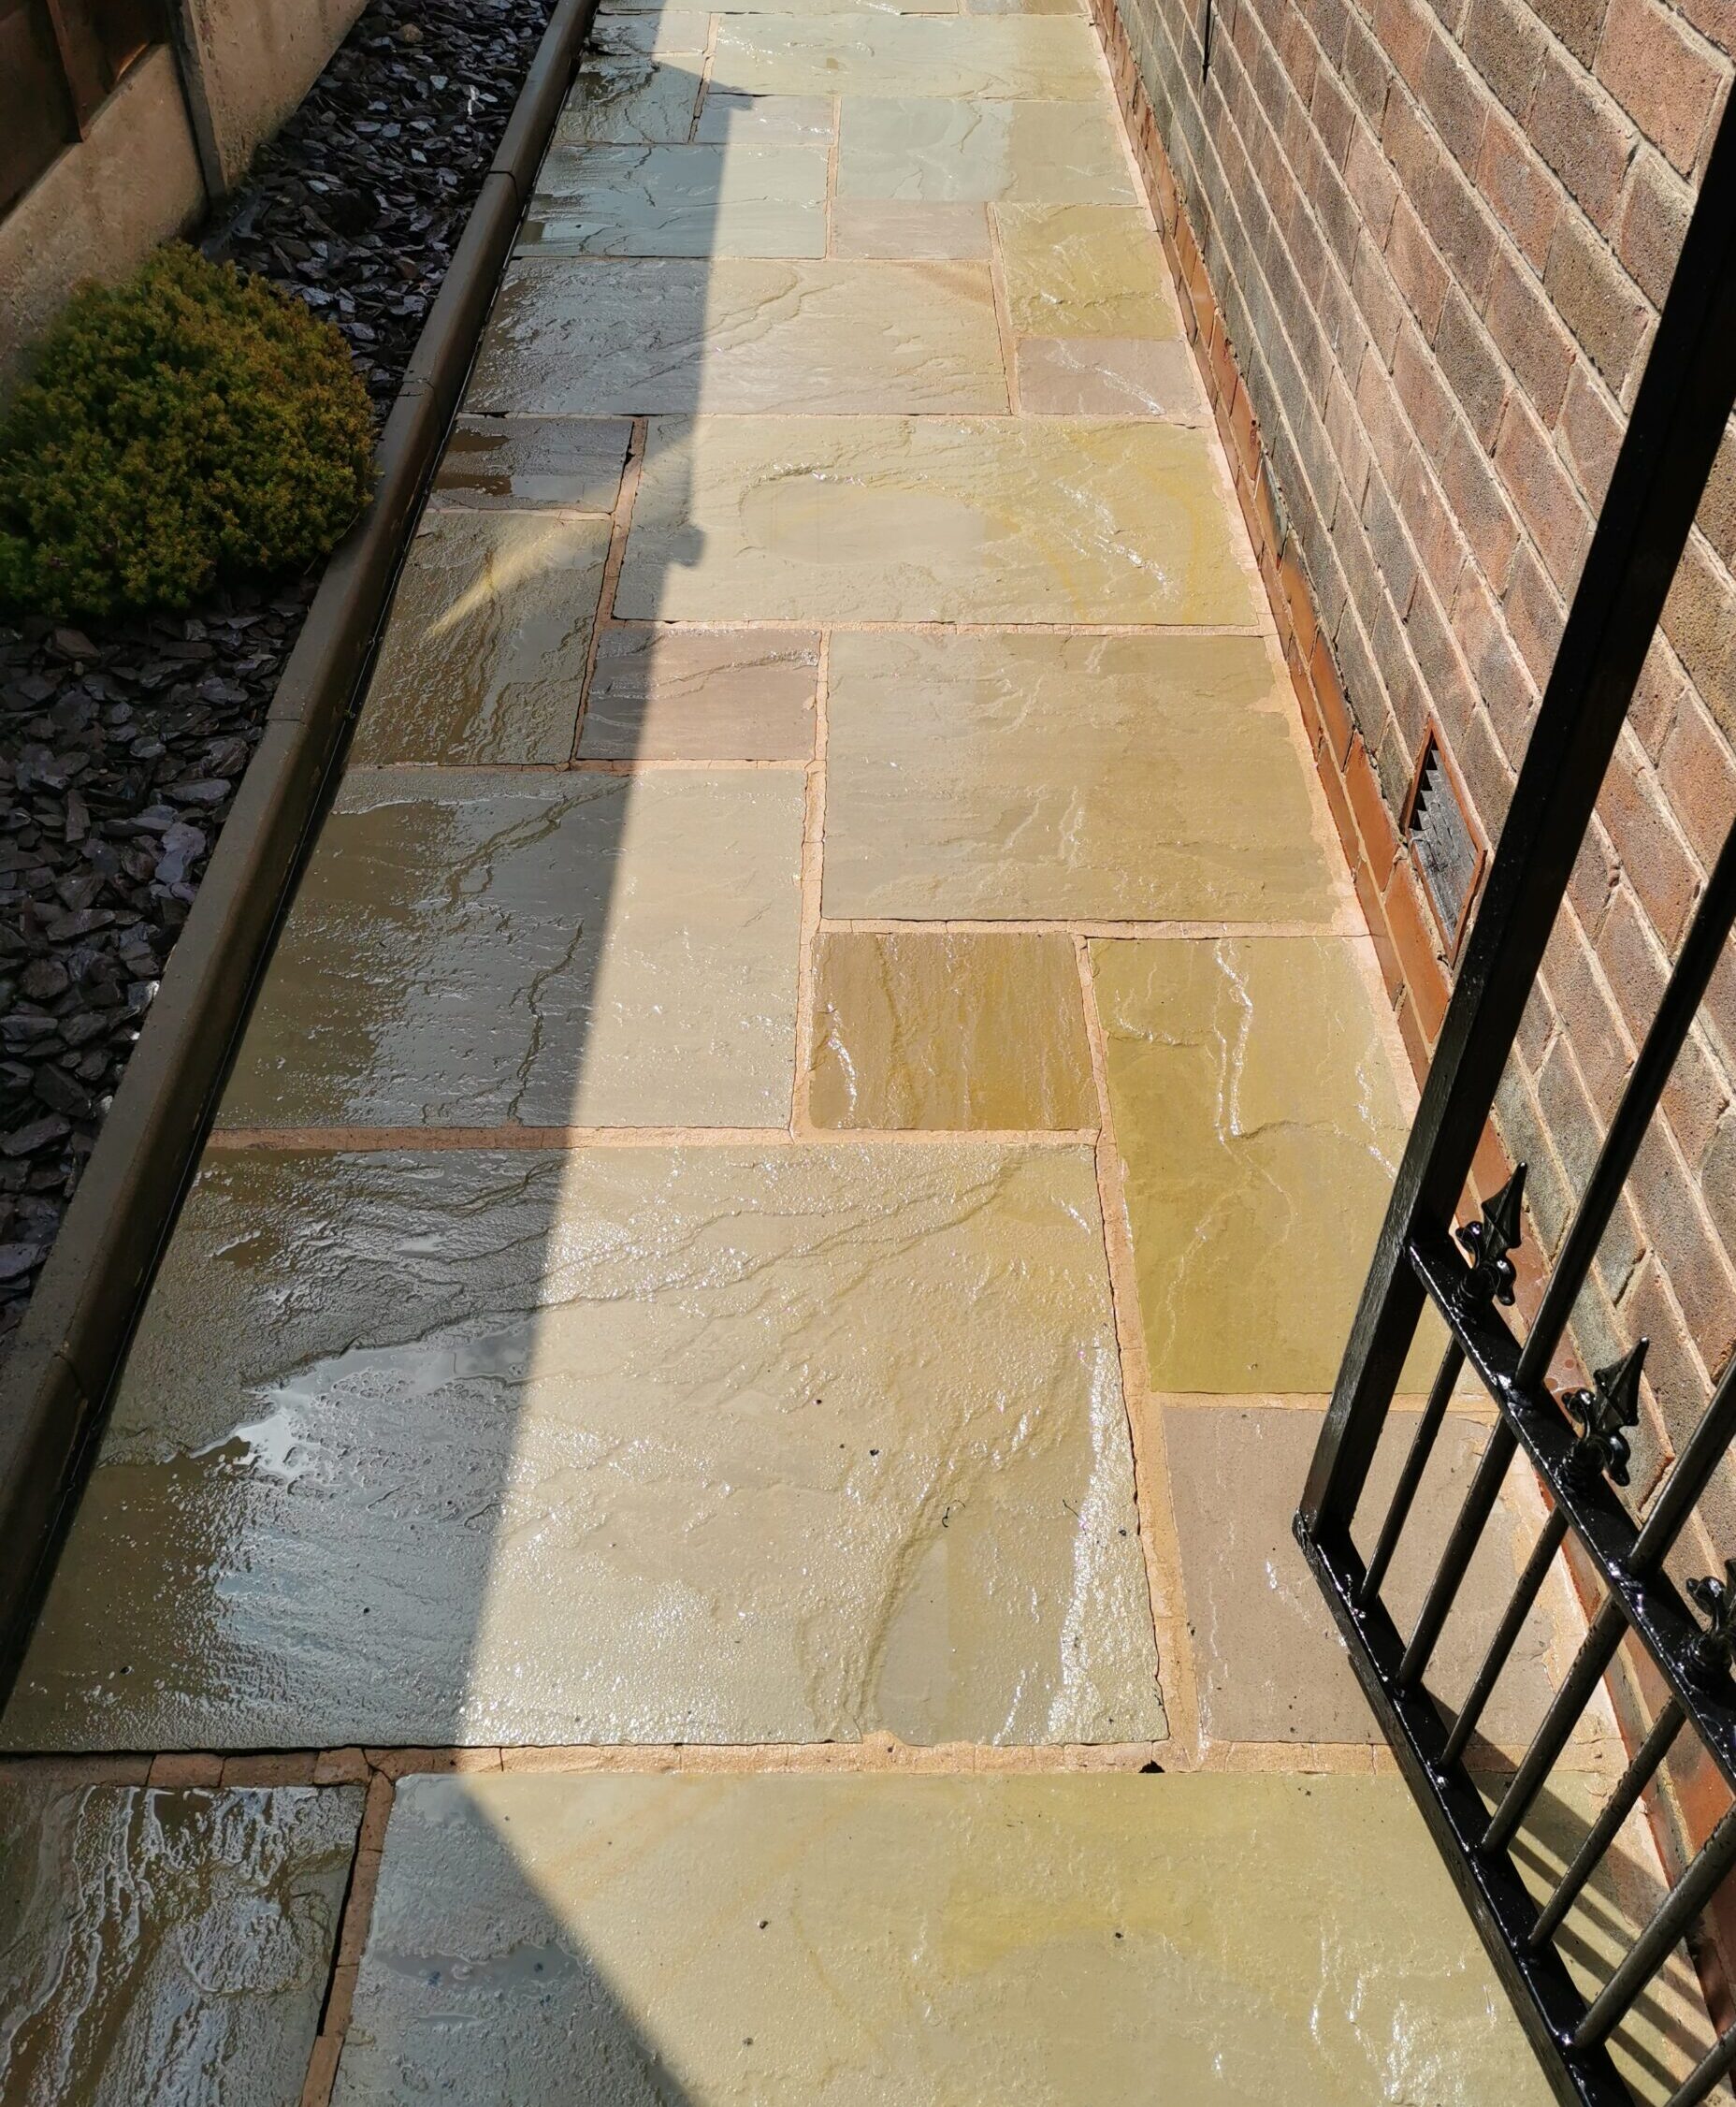 Driveway Cleaning Service Leigh, Outside Cleaning Services, Cleaning Service, Pressure Cleaning, Roof Cleaning, Driveways, Patio, Paths, Upvc Cleaning, Professional And Cheap Cleaning Services, Facade Cleaning, Outside Cleaning, Gutters Cleaning Services, Patio Pressure Cleaning,